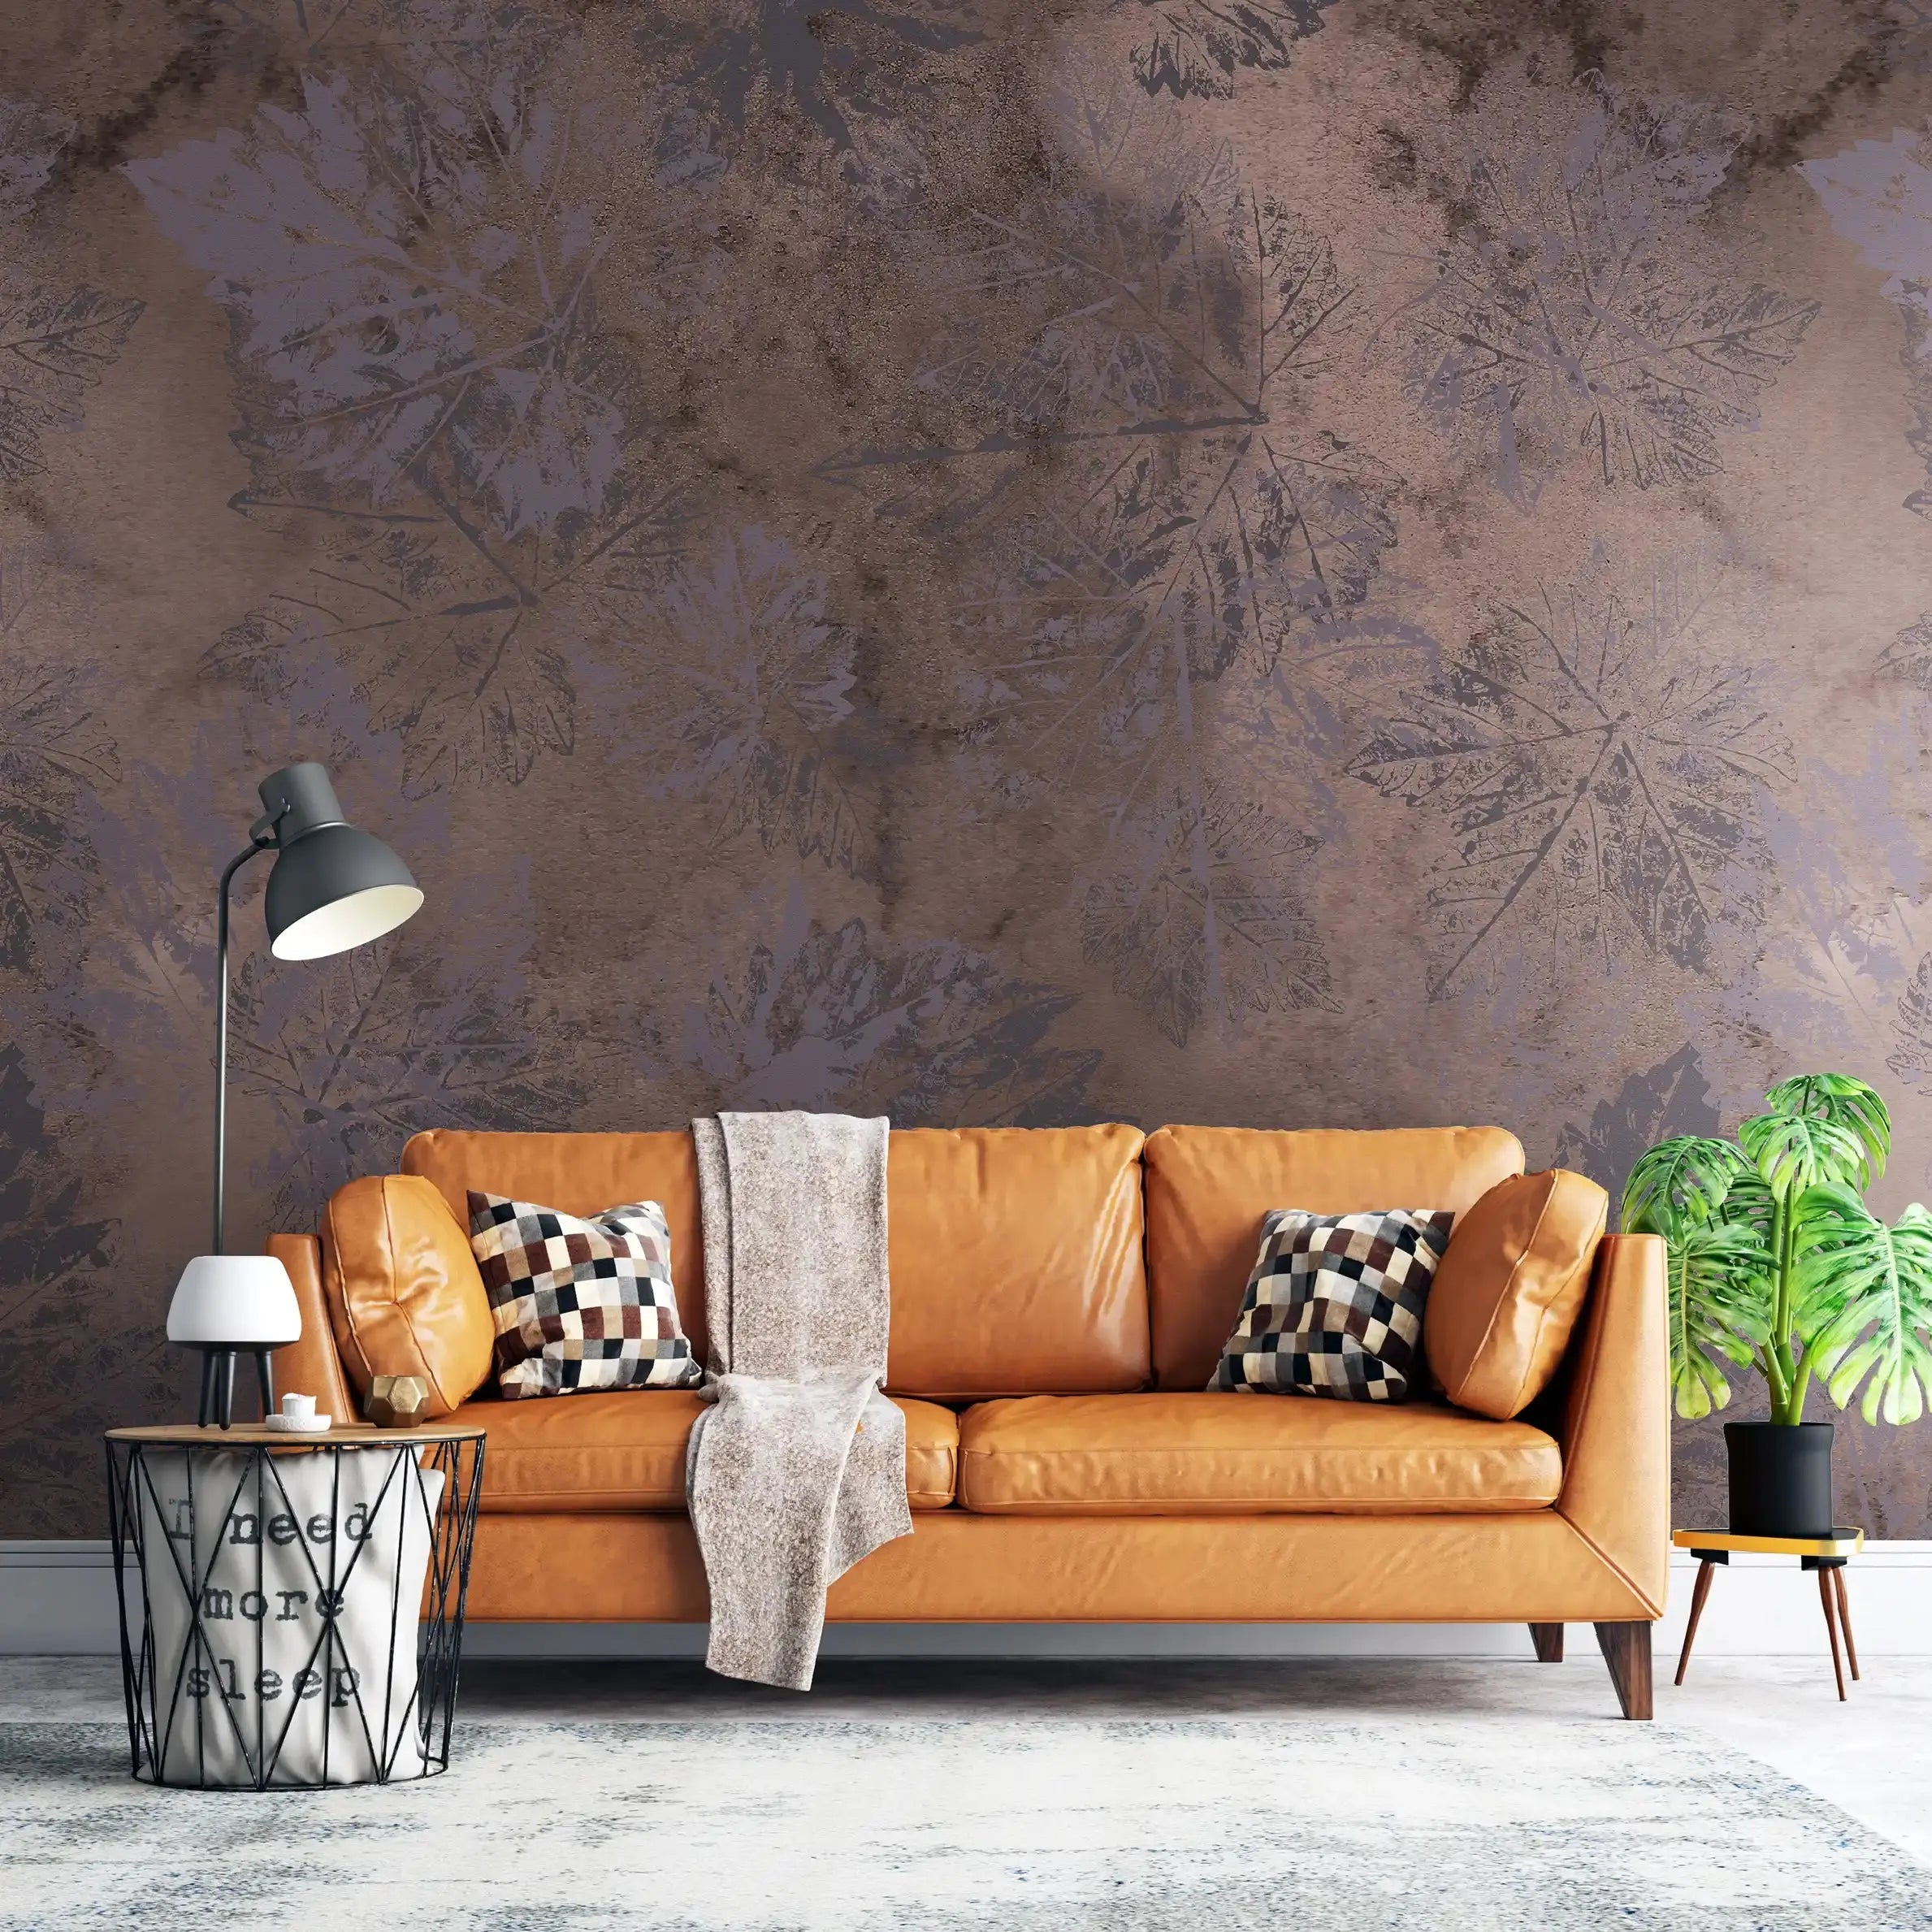 3072-A / Vintage Floral Mural Peel and Stick Wallpaper - Dark Brown Nature-Inspired Wall Decor for Modern Homes - Artevella